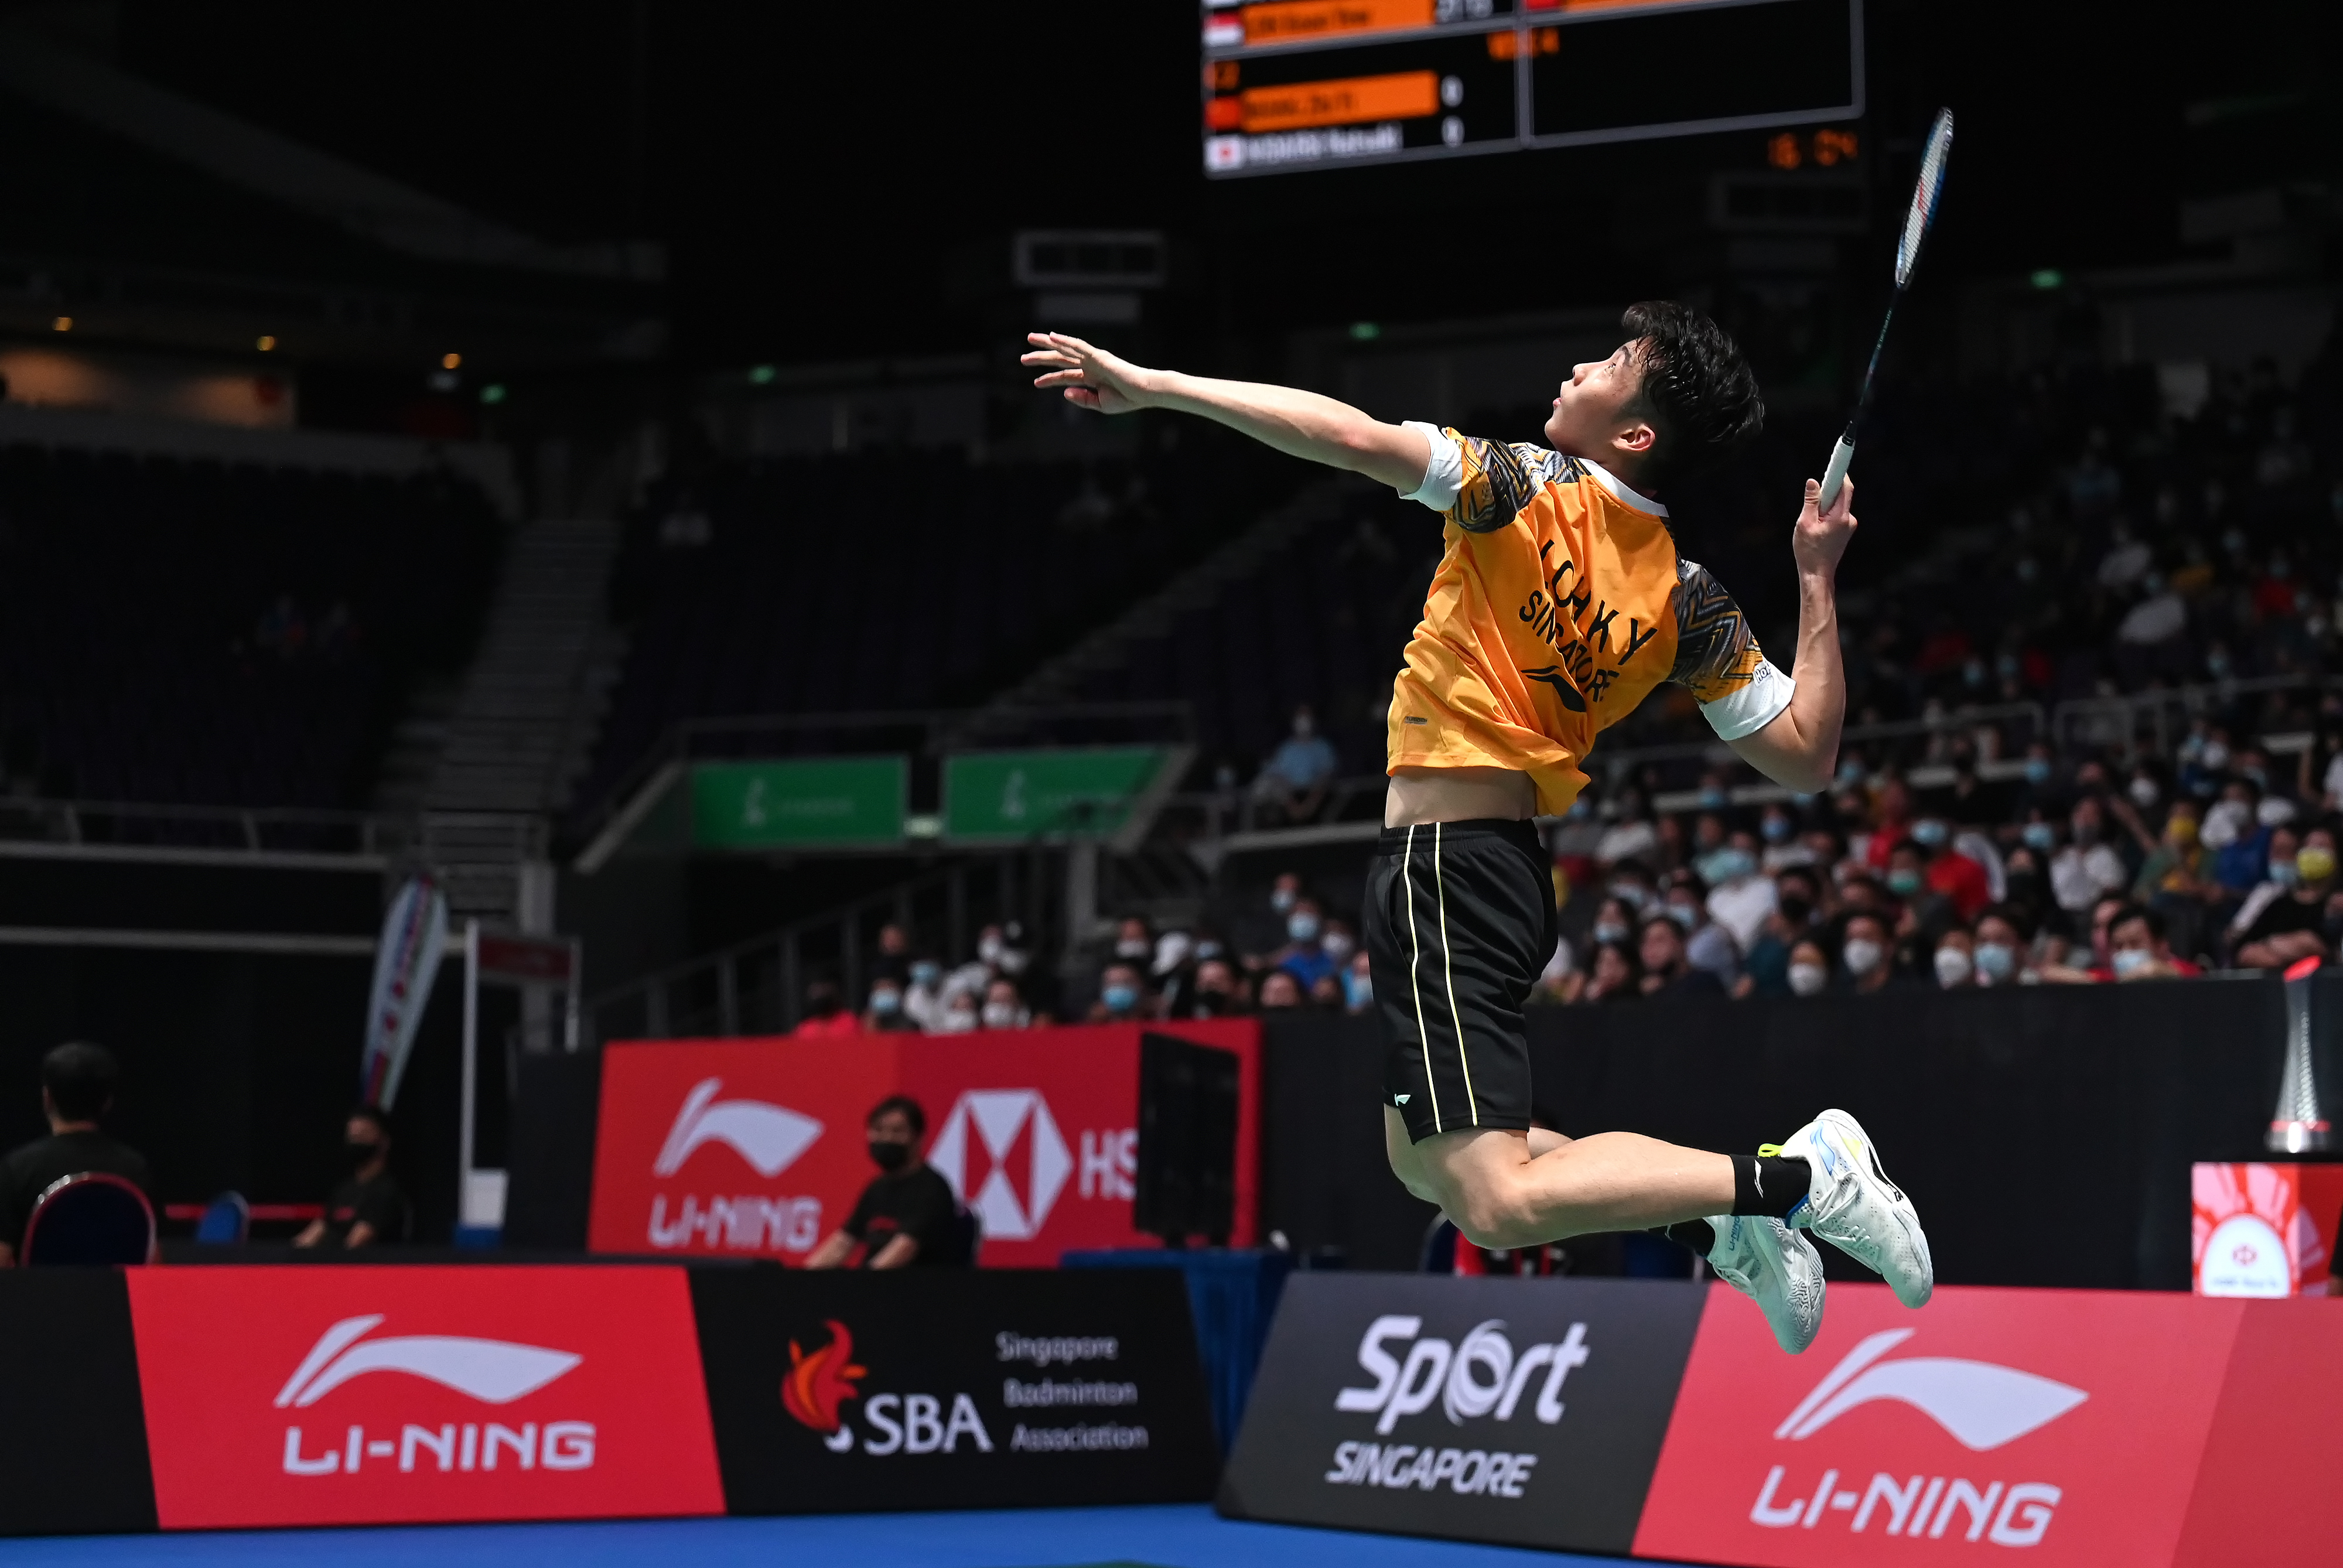 TeamSGs shuttlers are through to the Quarter-finals of the Singapore Badminton Open!